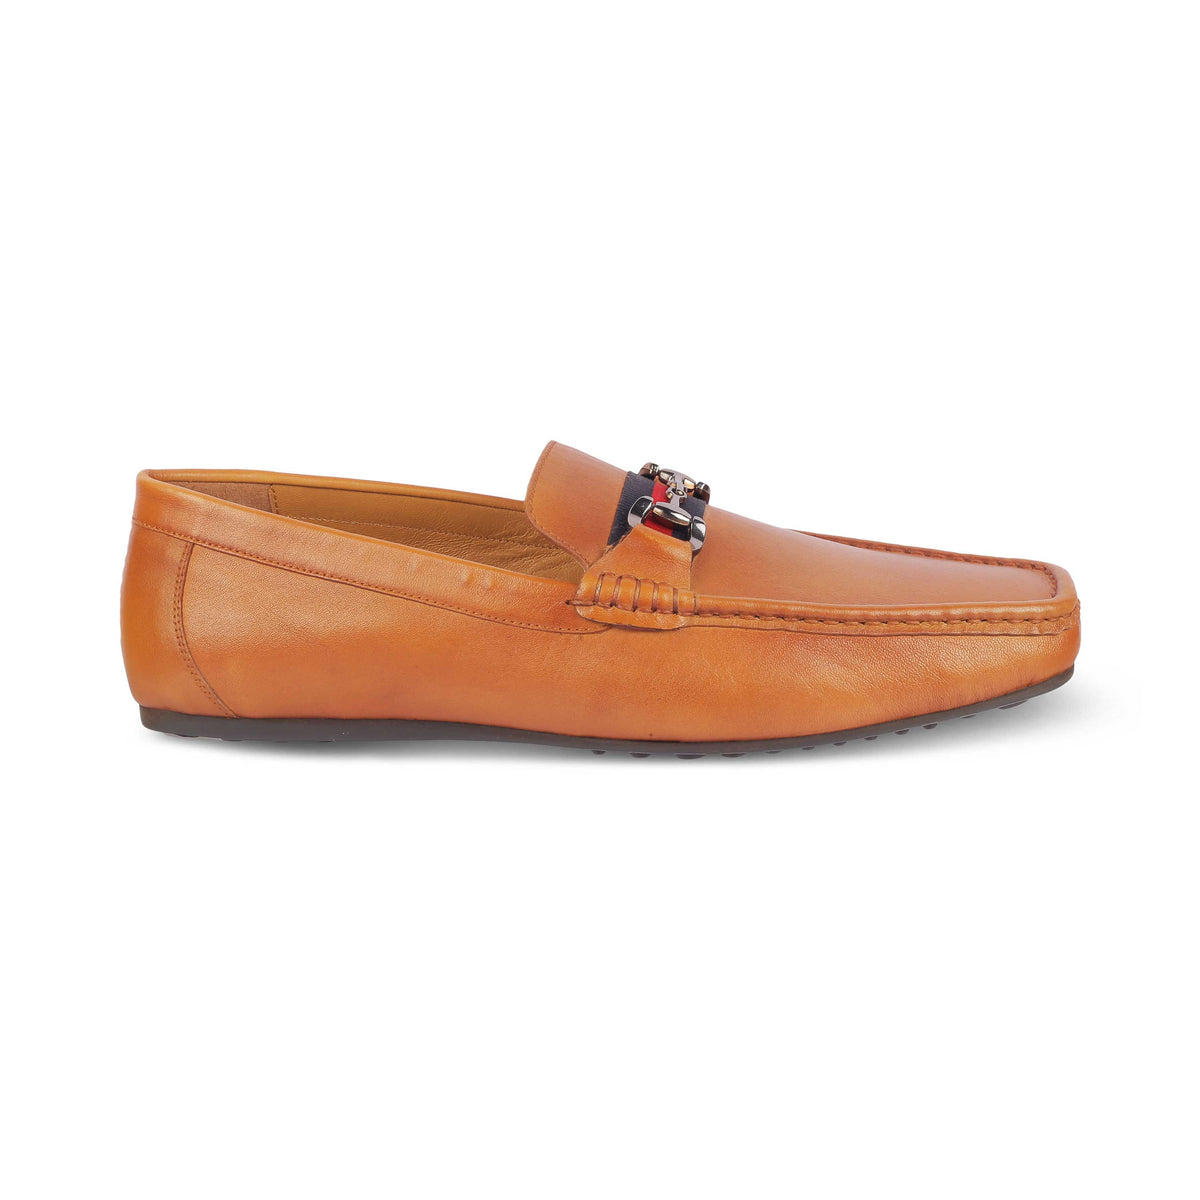 Tresmode Bilbao Tan Men's Leather Loafers - Tresmode